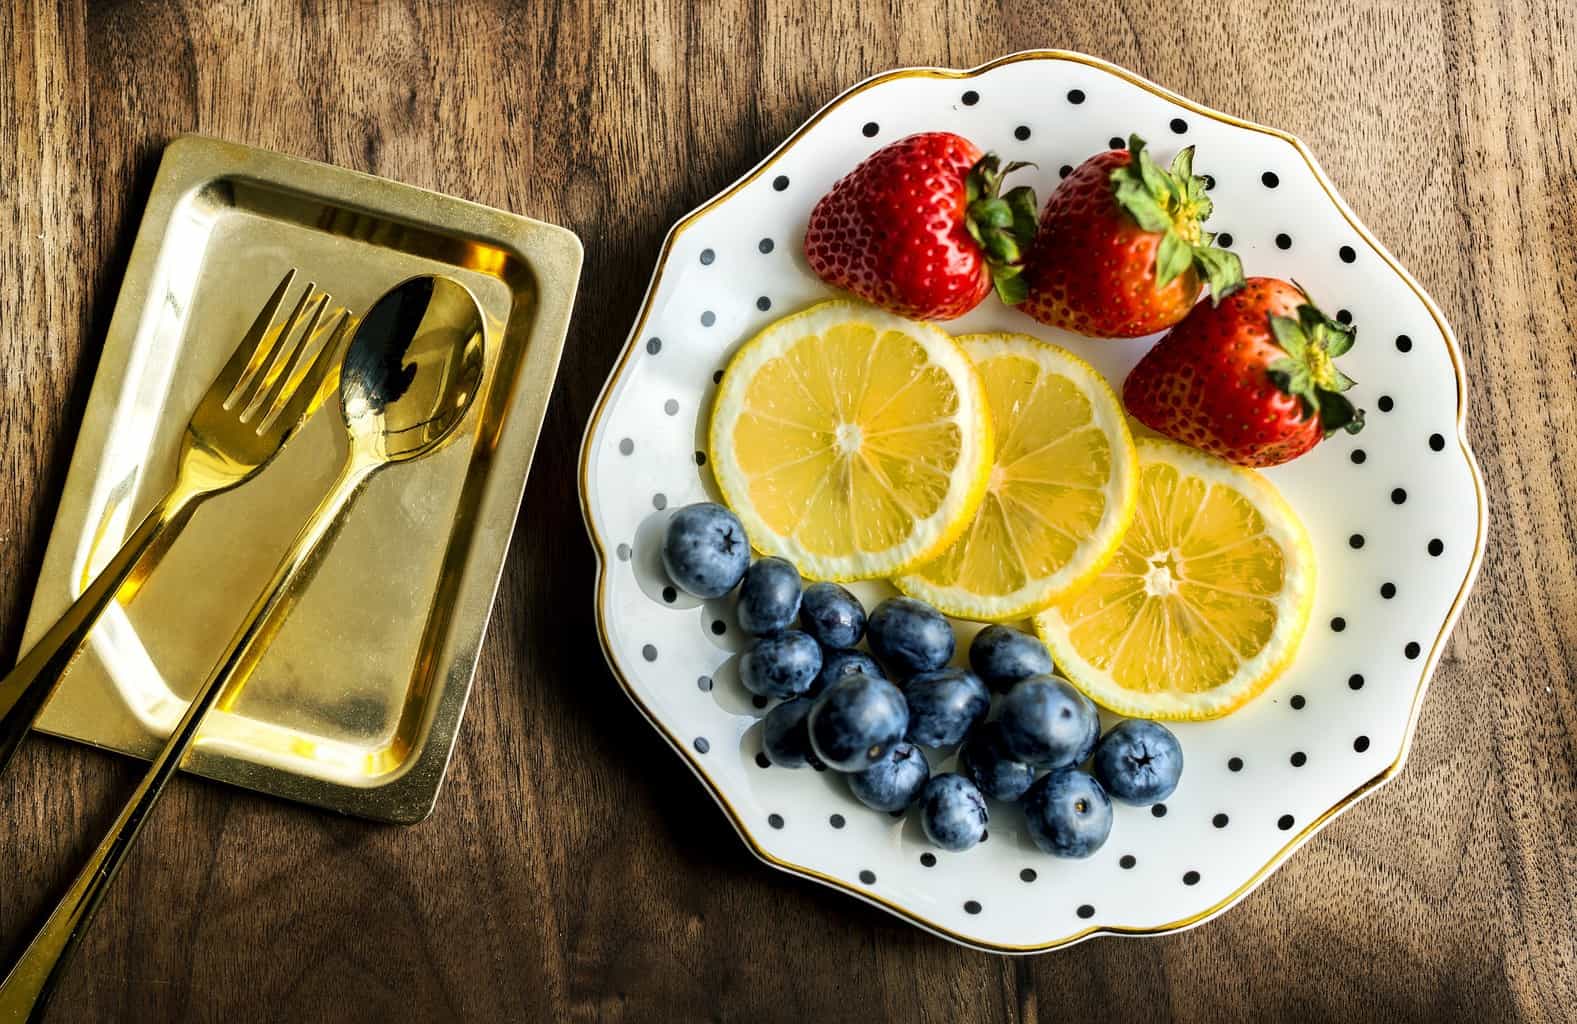 Plate of fruit with silverware.